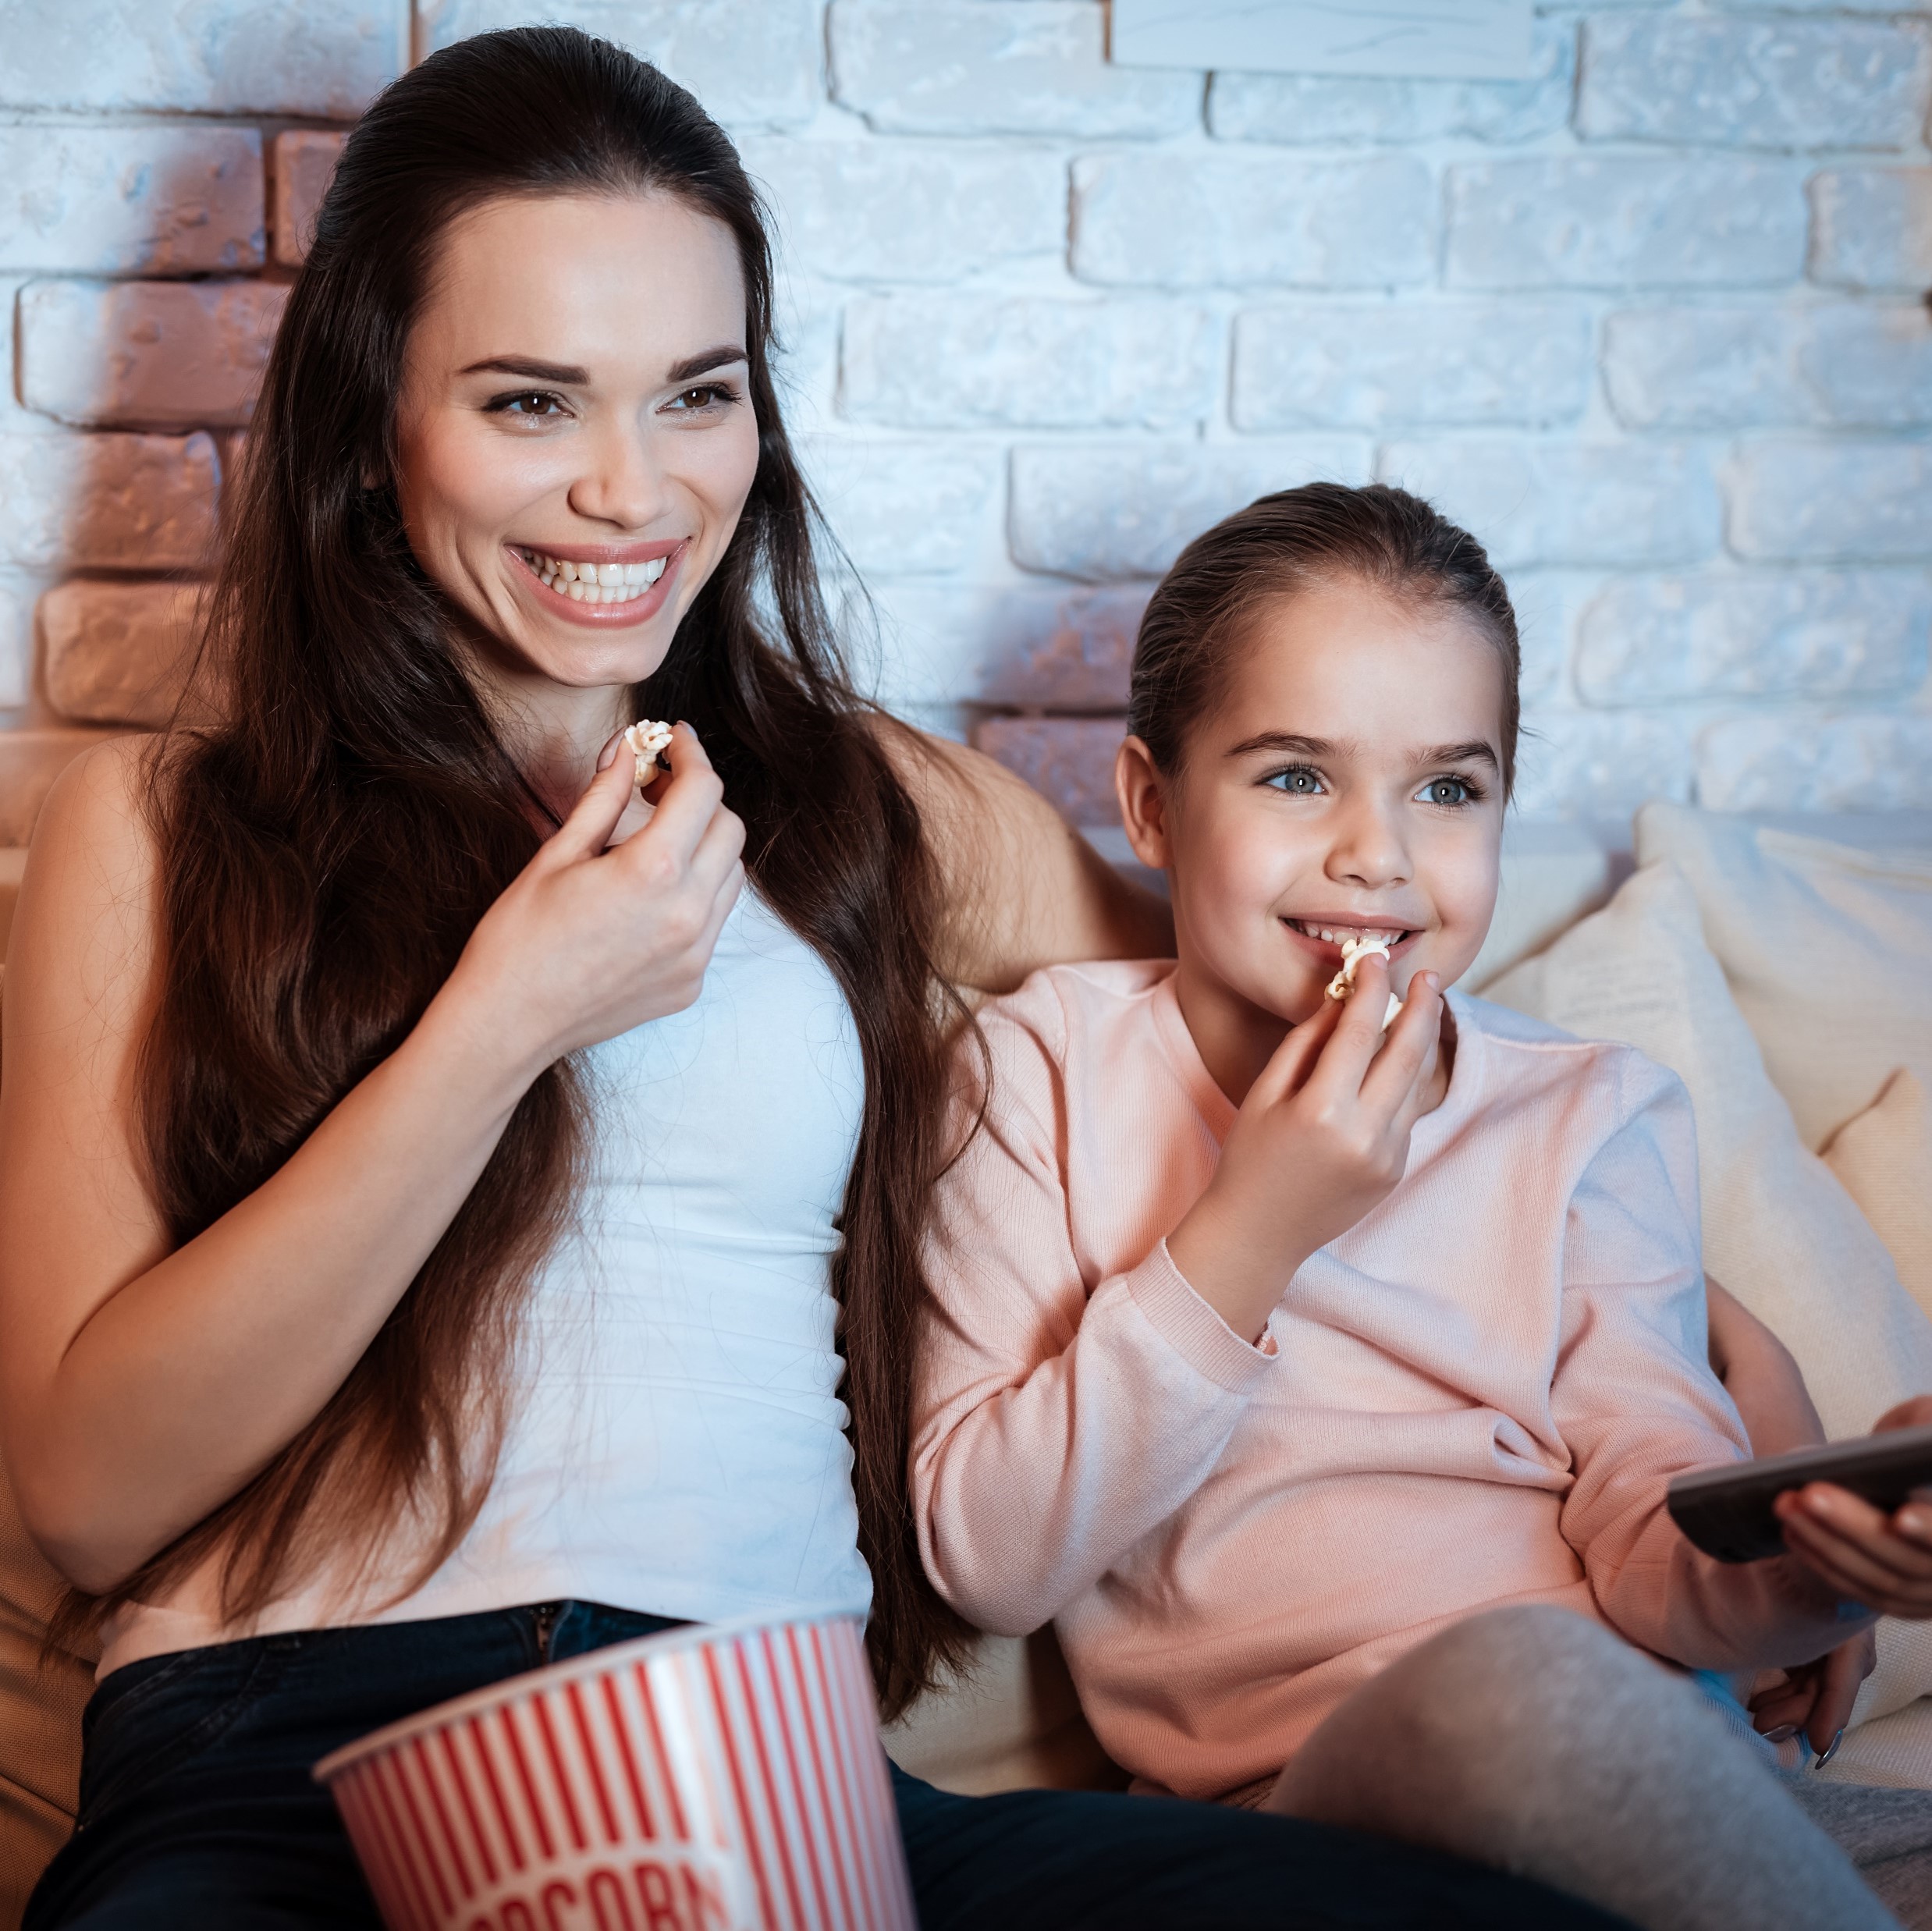 A mom and a Daughter eating popcorn together